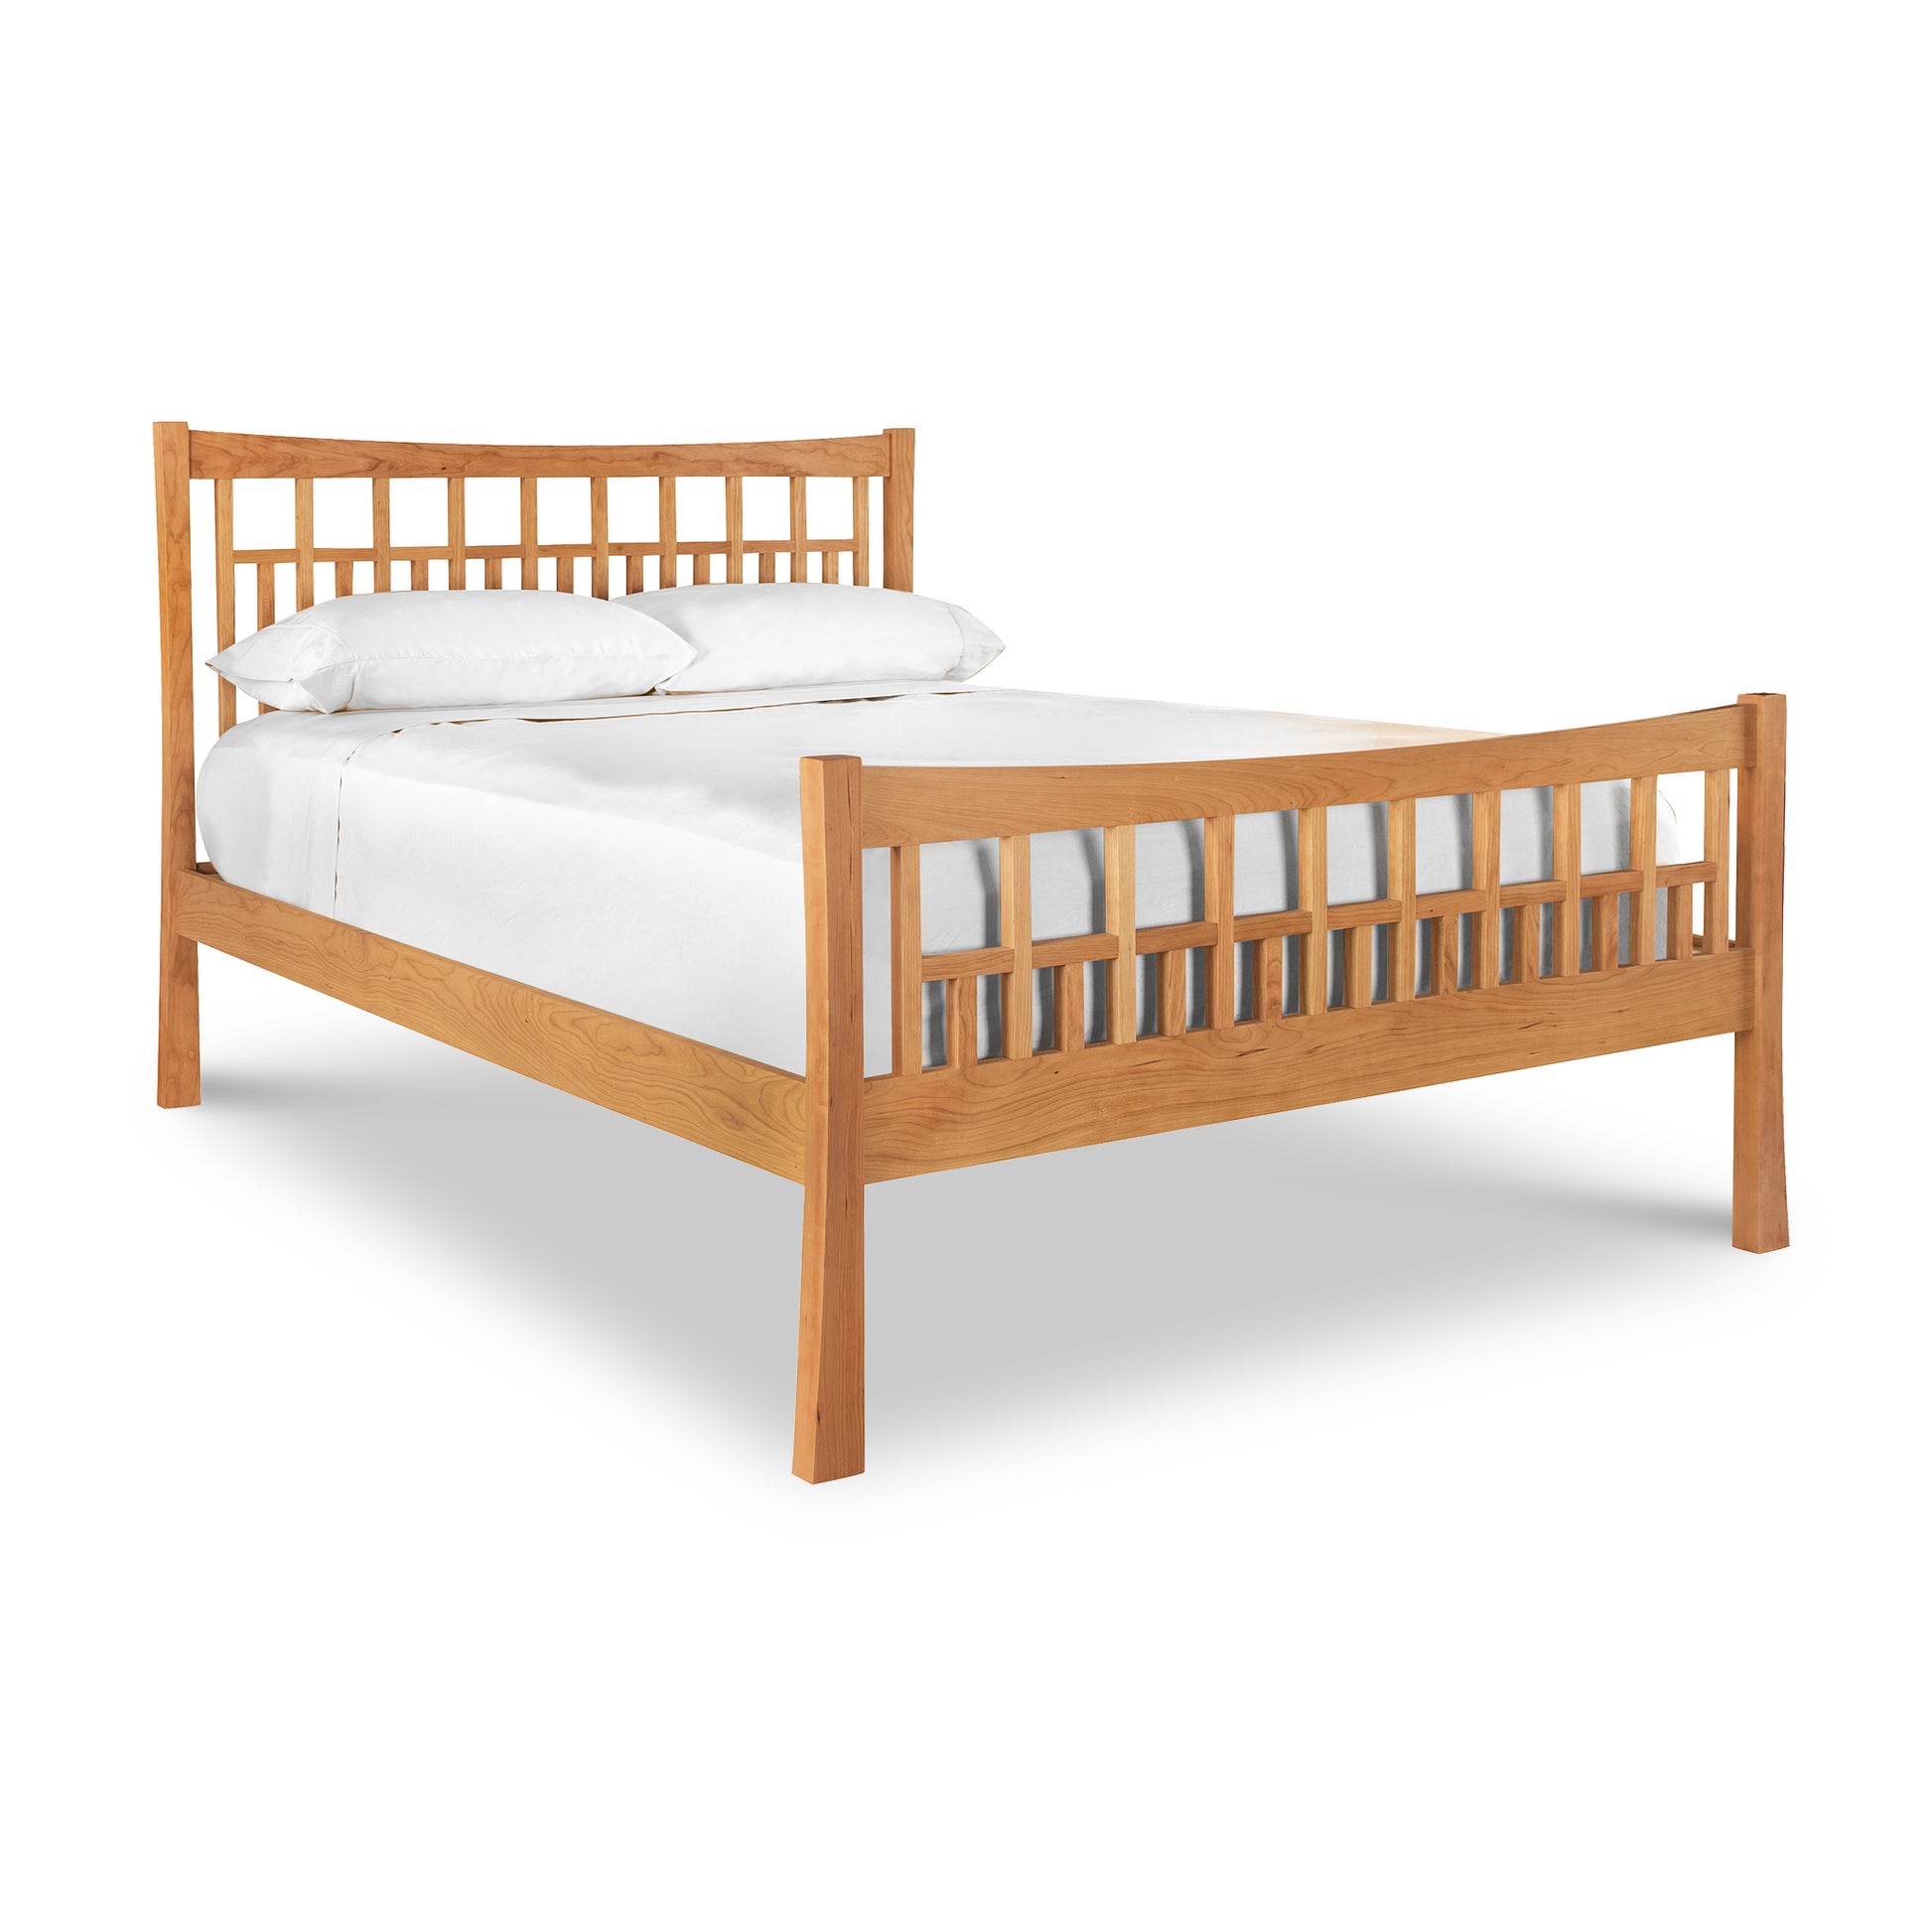 A Vermont Furniture Designs Contemporary Craftsman High Footboard Bed with slatted headboard and footboard, made up with white bedding, isolated on a white background, features an eco-friendly oil finish.